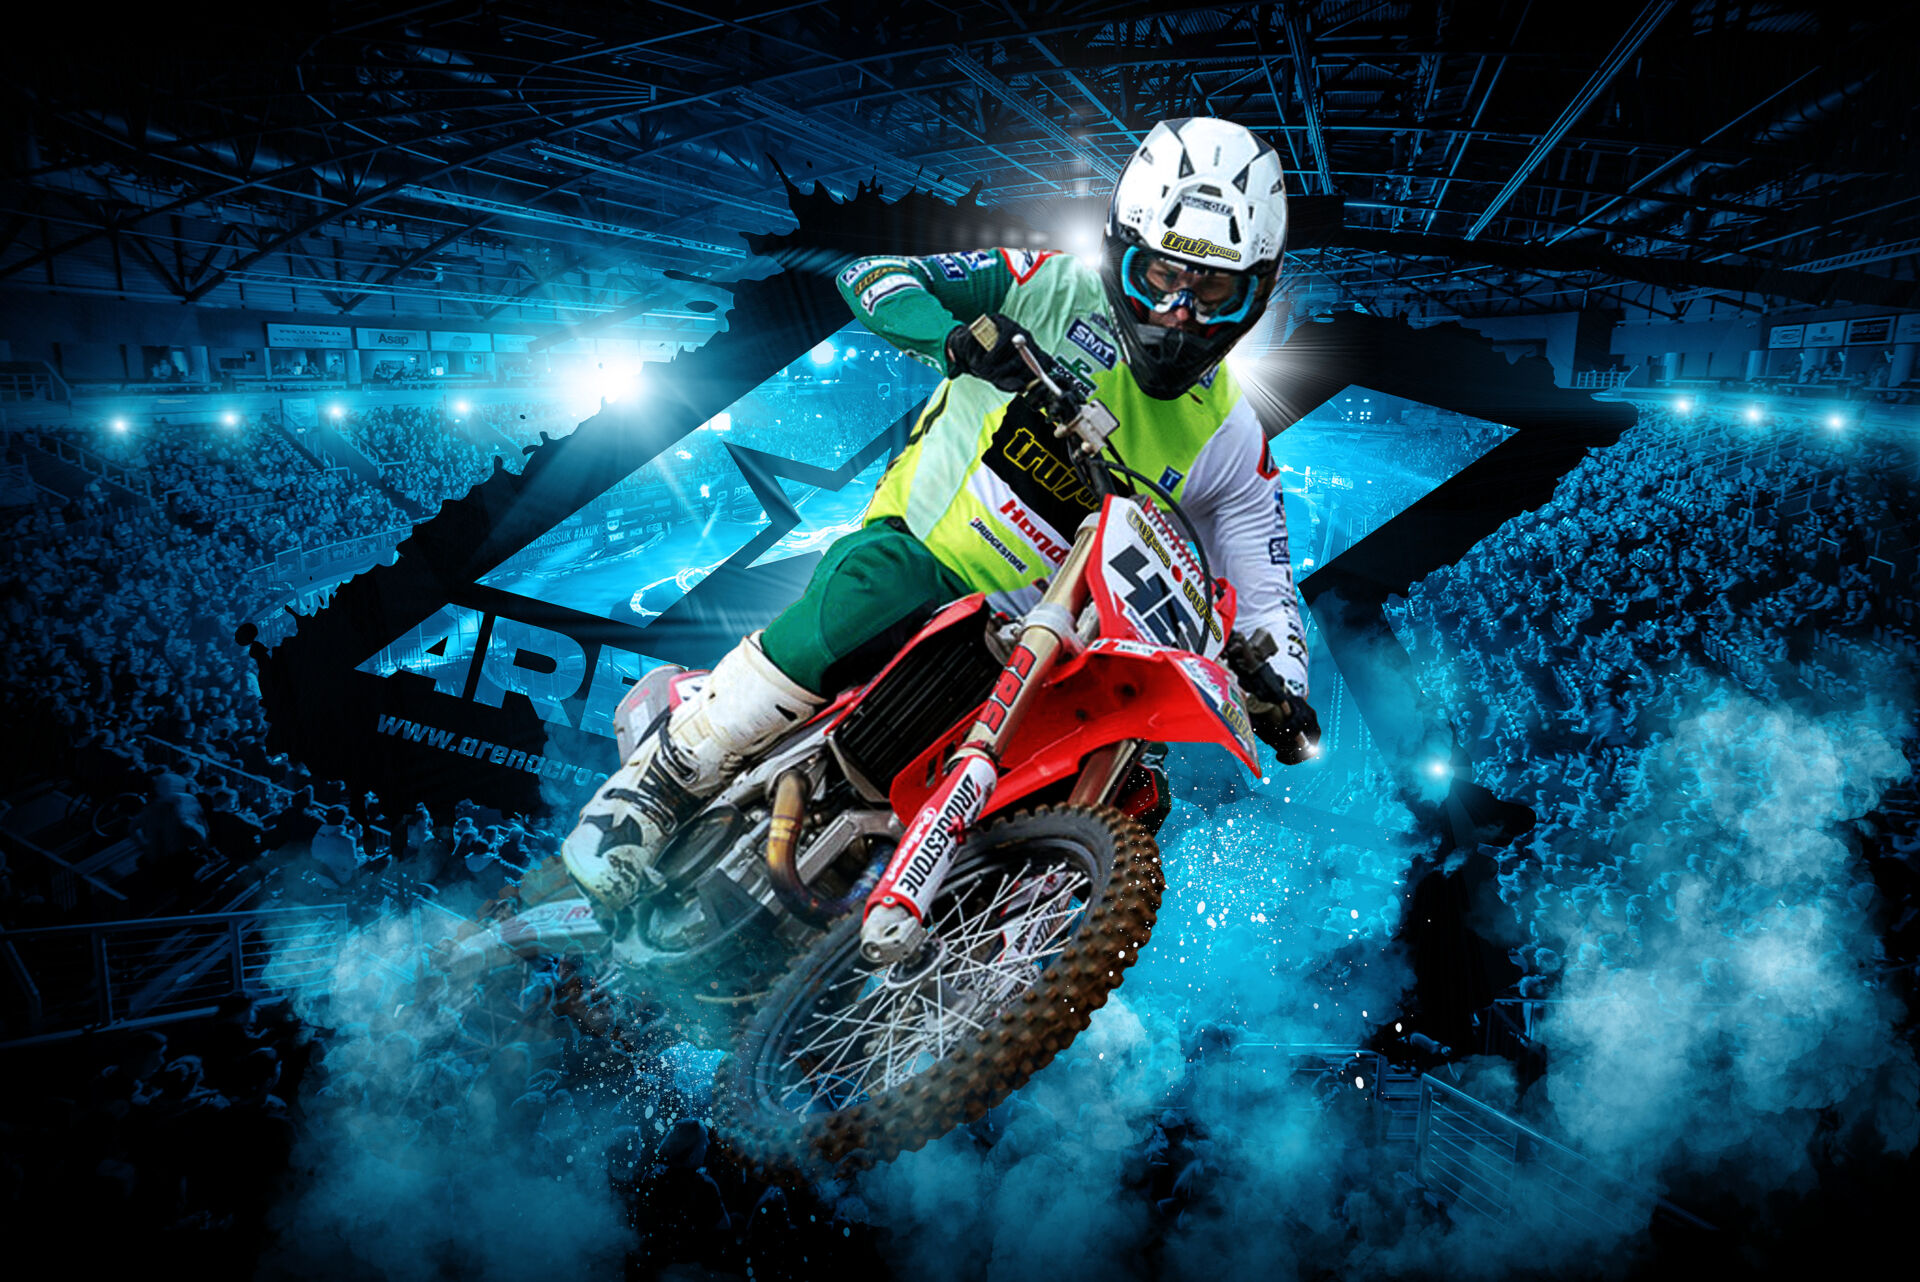 Arenacross adds Nicholls to 2023 series roster